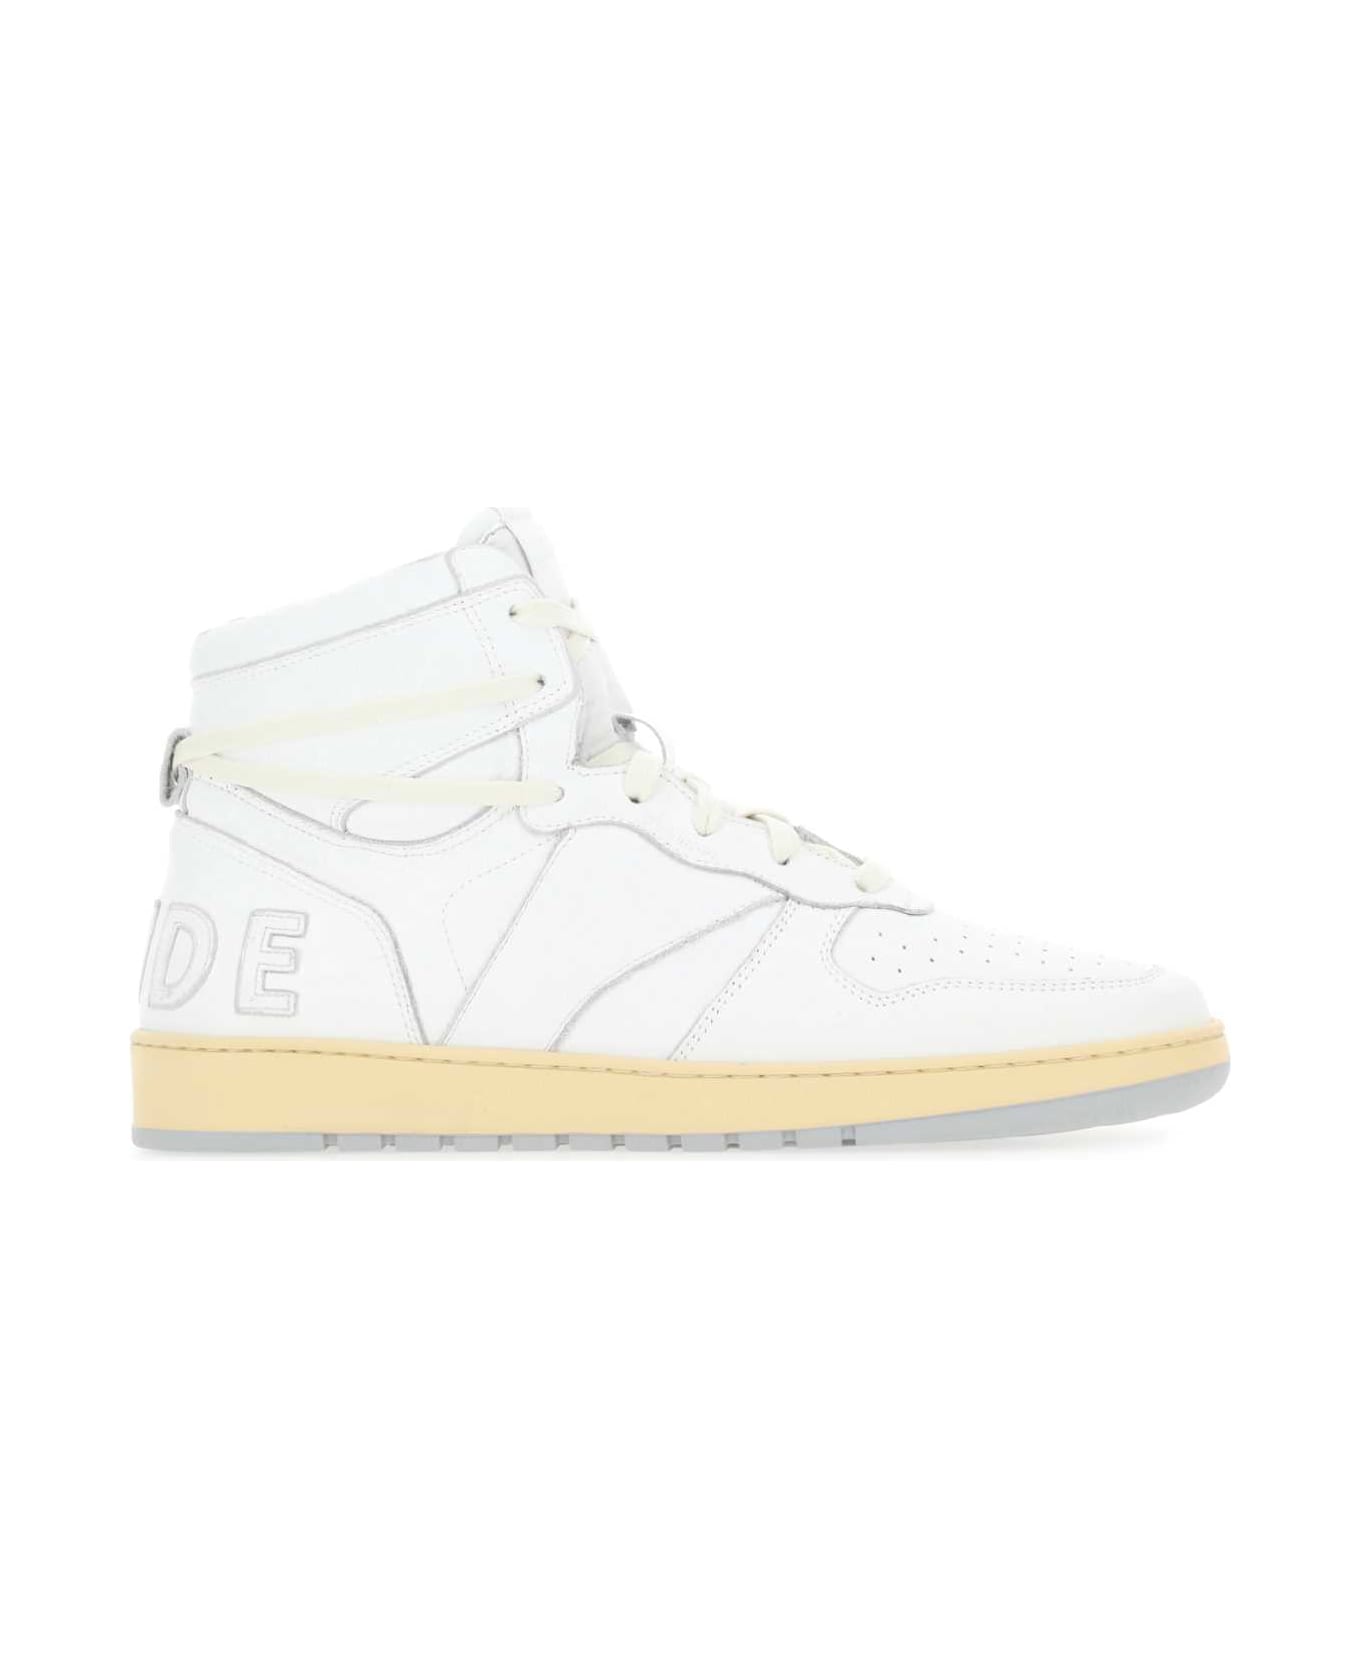 Rhude White Leather Rhecess Sneakers - 0444